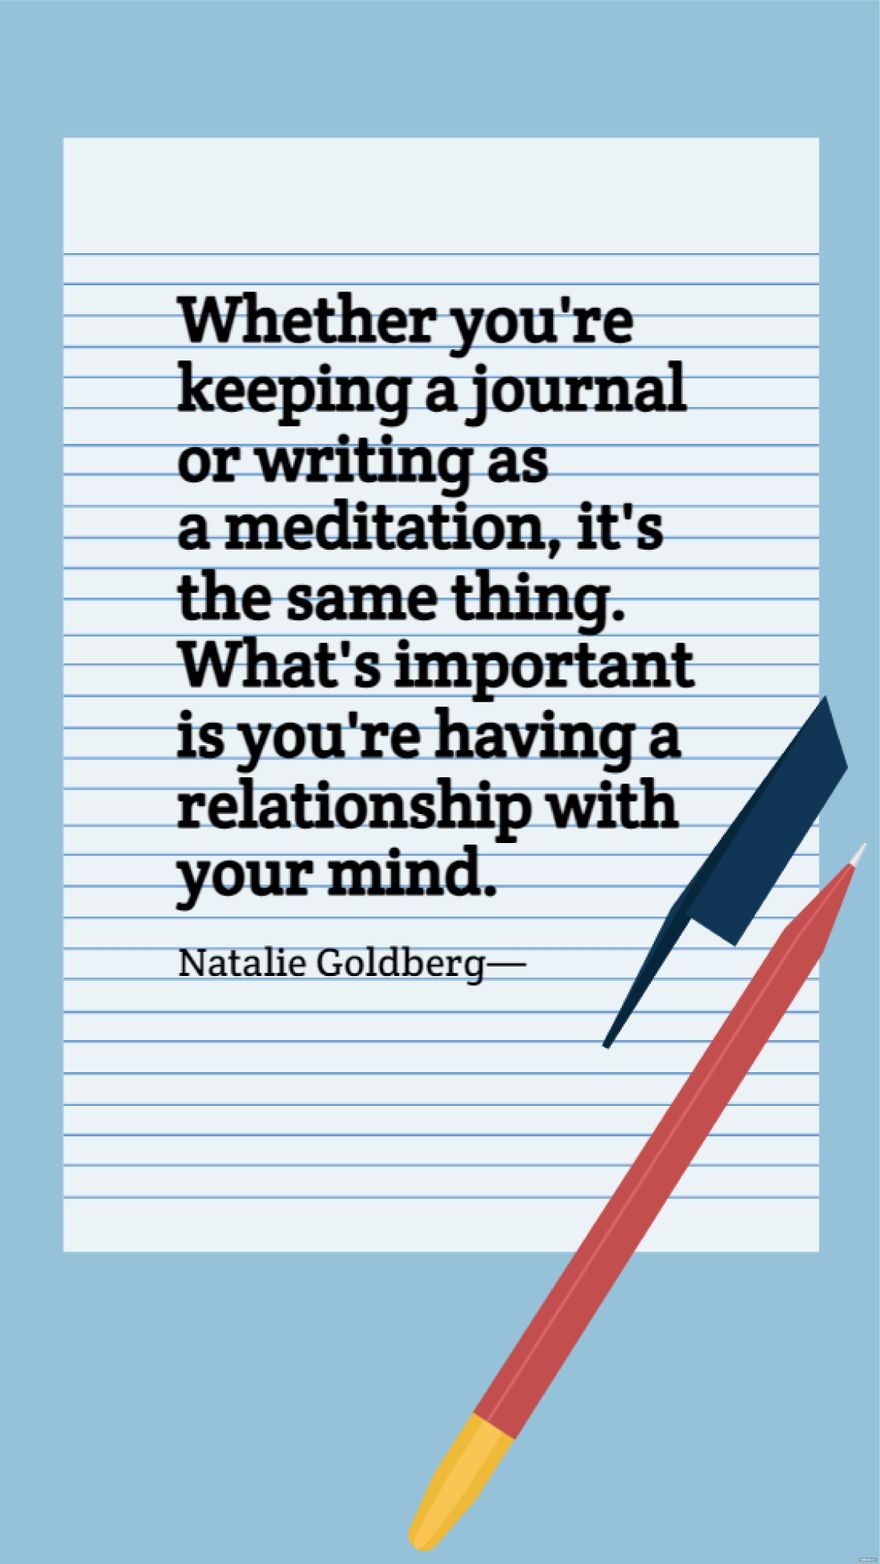 Natalie Goldberg - Whether you're keeping a journal or writing as a meditation, it's the same thing. What's important is you're having a relationship with your mind.